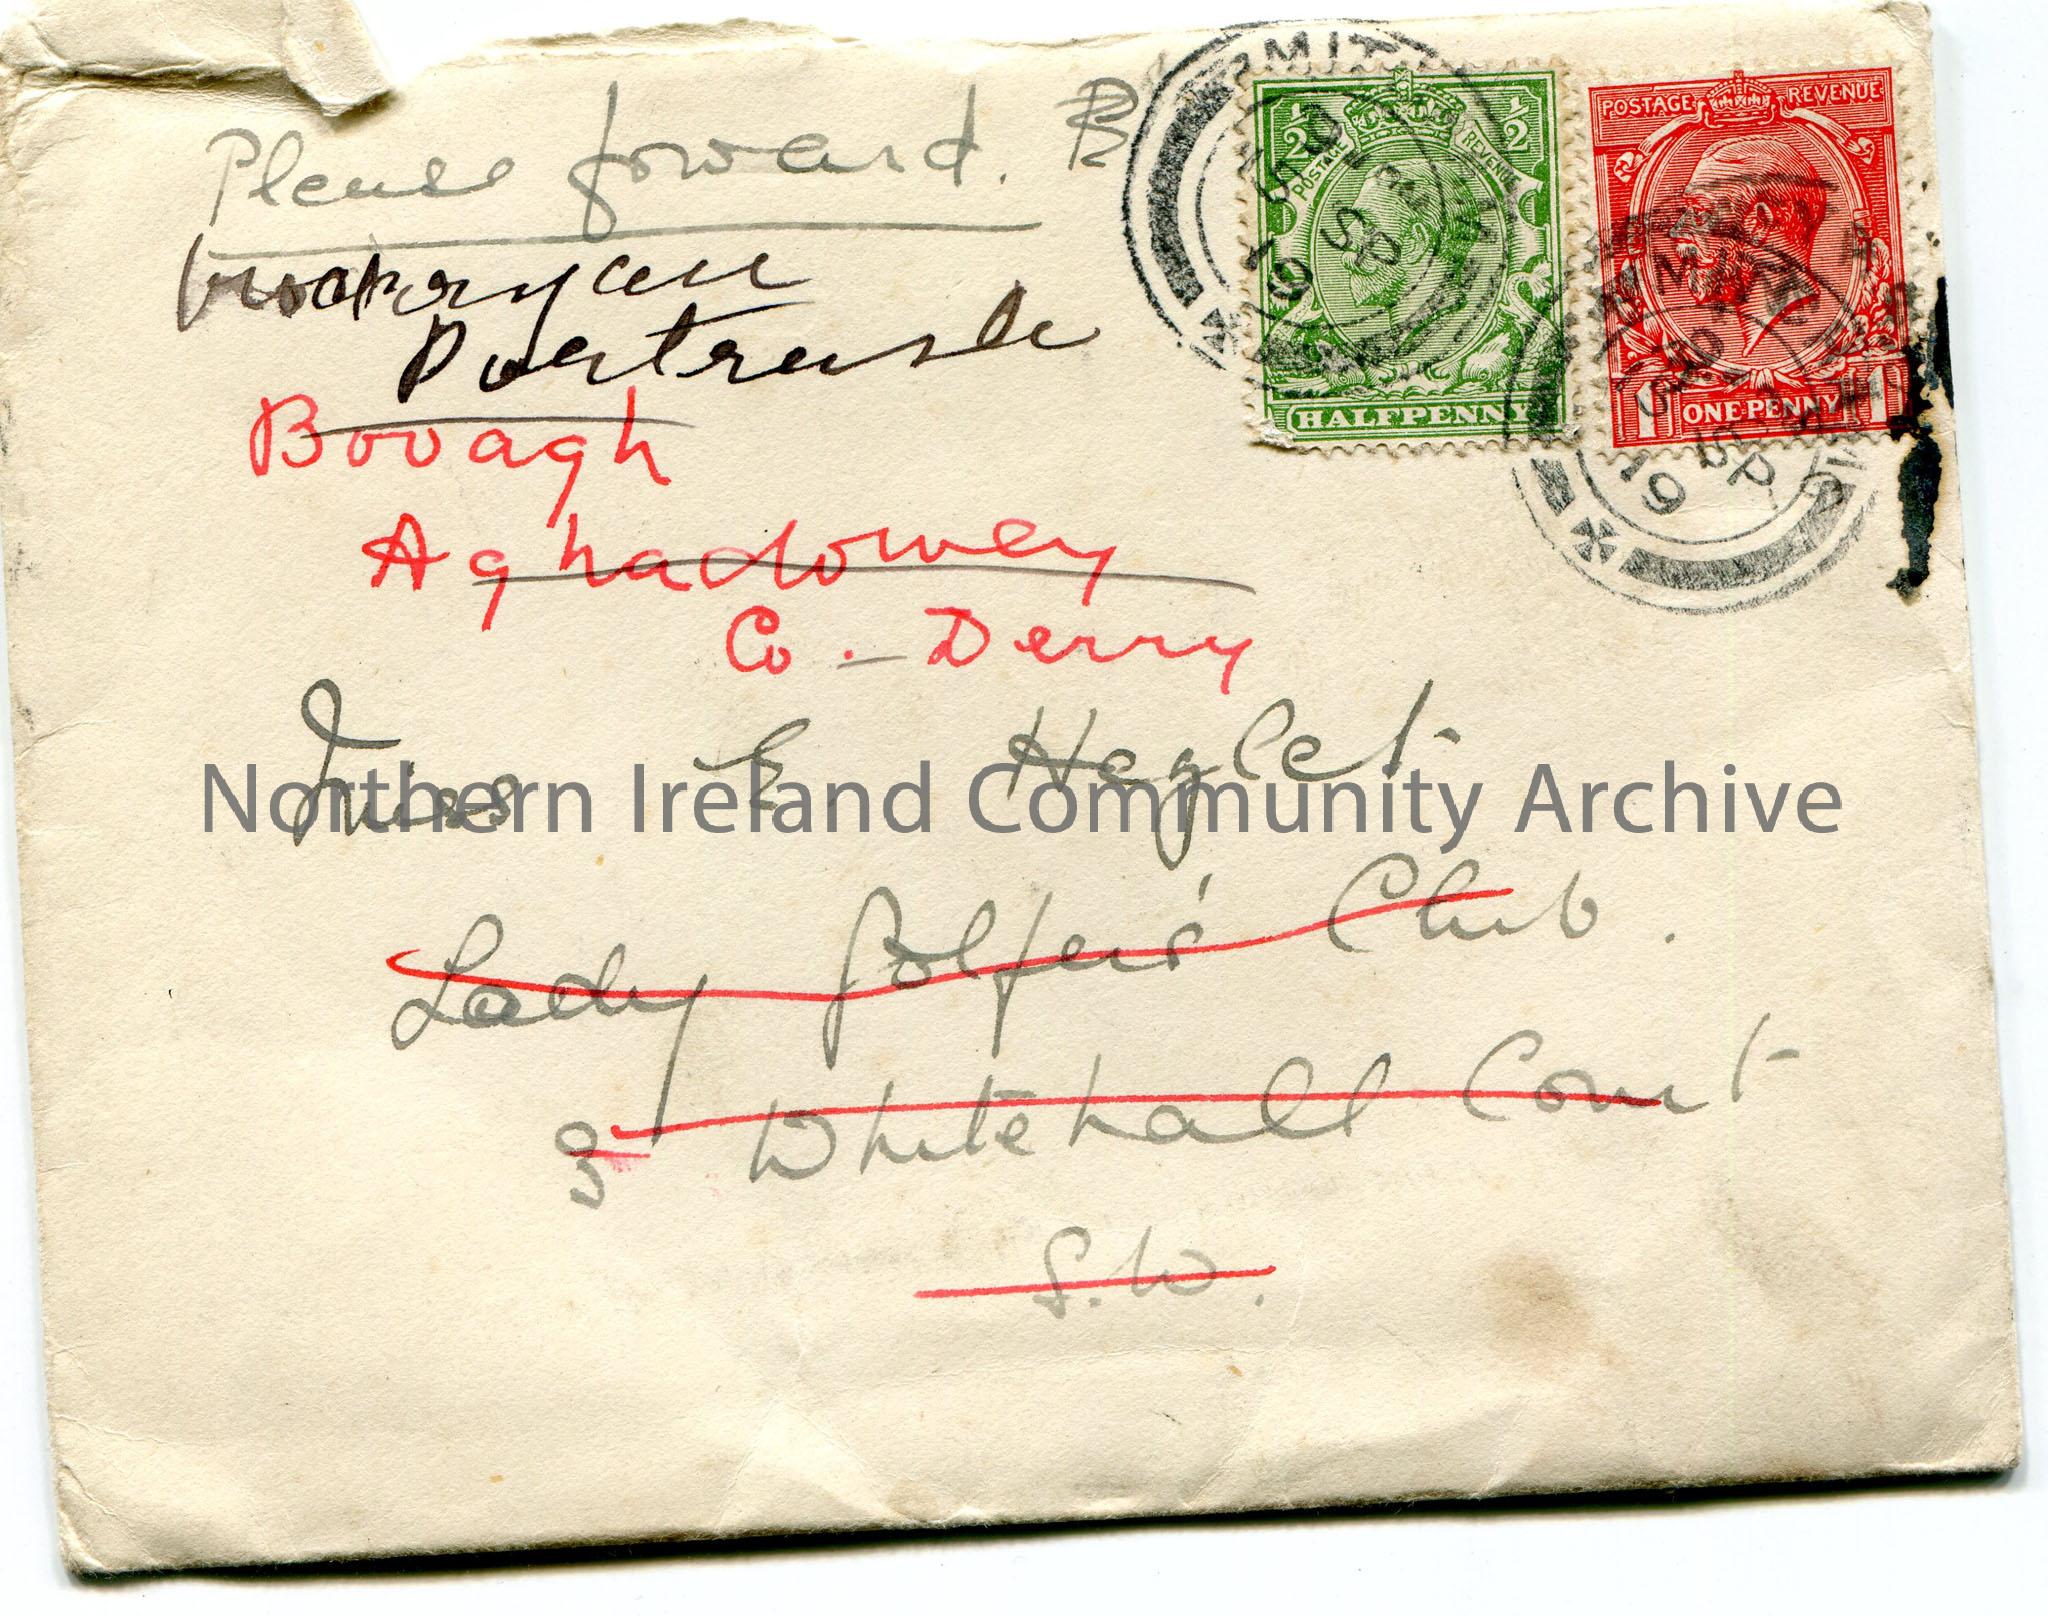 Envelope, handwritten addressed to Miss E. Hezlet, Lady Golfer’s Club, 3 Whitehall Court, S.W which is scored out. Also addressed as Bovagh, Aghadowey…